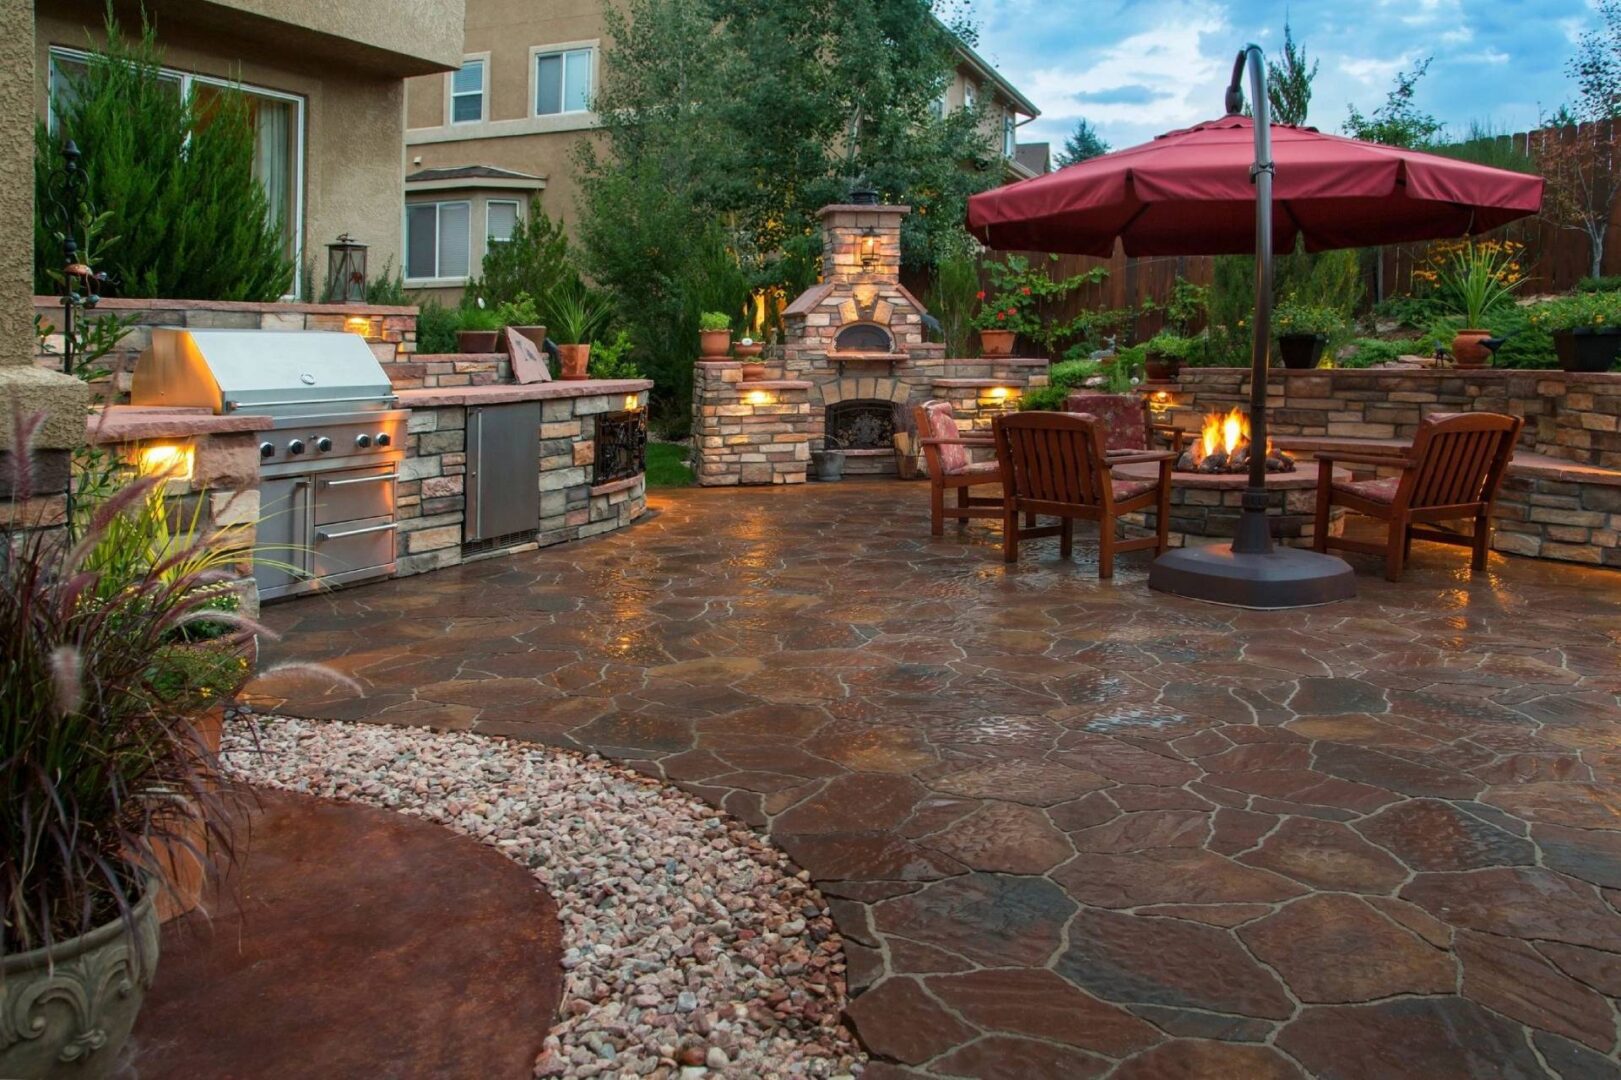 Paver Patio With a Fire Pit